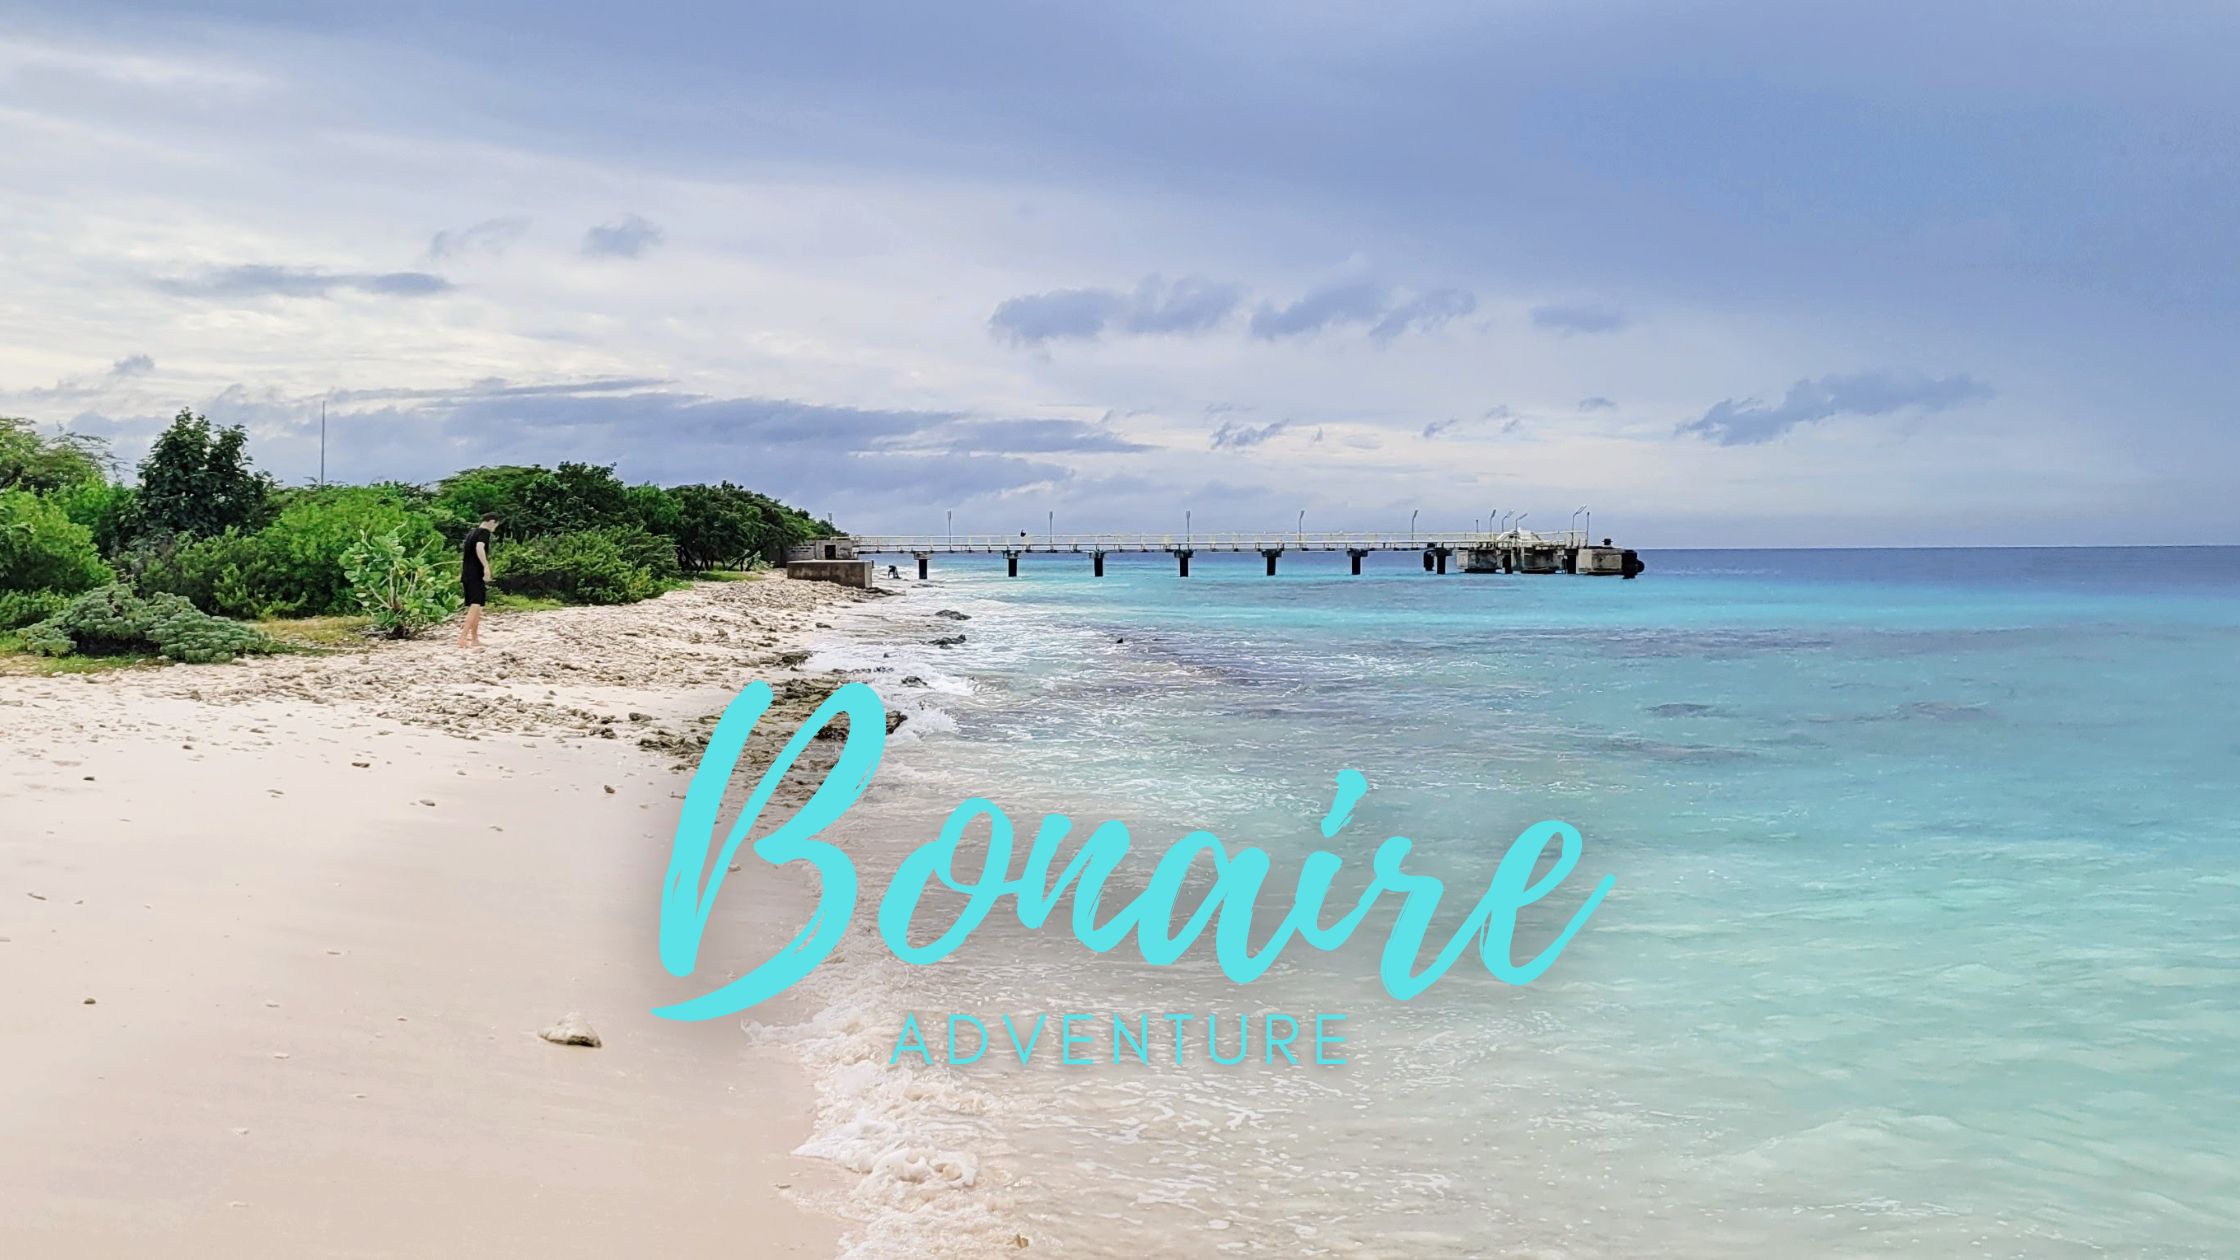 Contact us today to start planning your next vacation to the beautiful island of Bonaire!